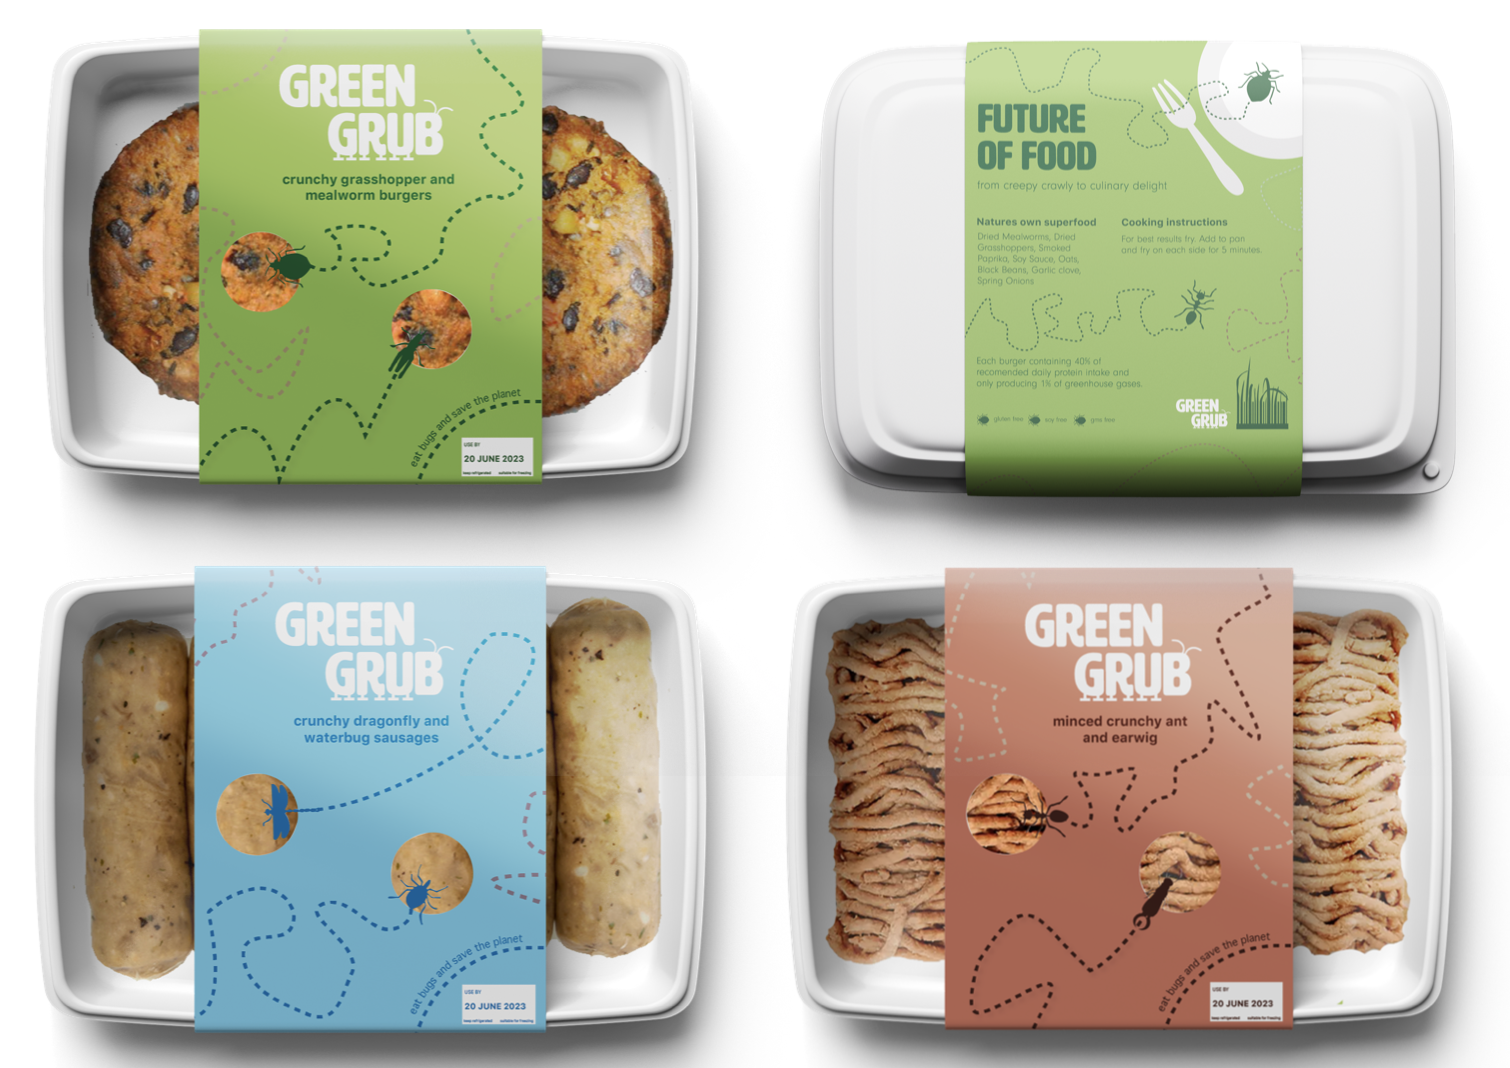 Graphic design work by Lauren Kerr showing the packaging design for the butchers bug meat, colourful labels with logo at top and circular windows showing food.